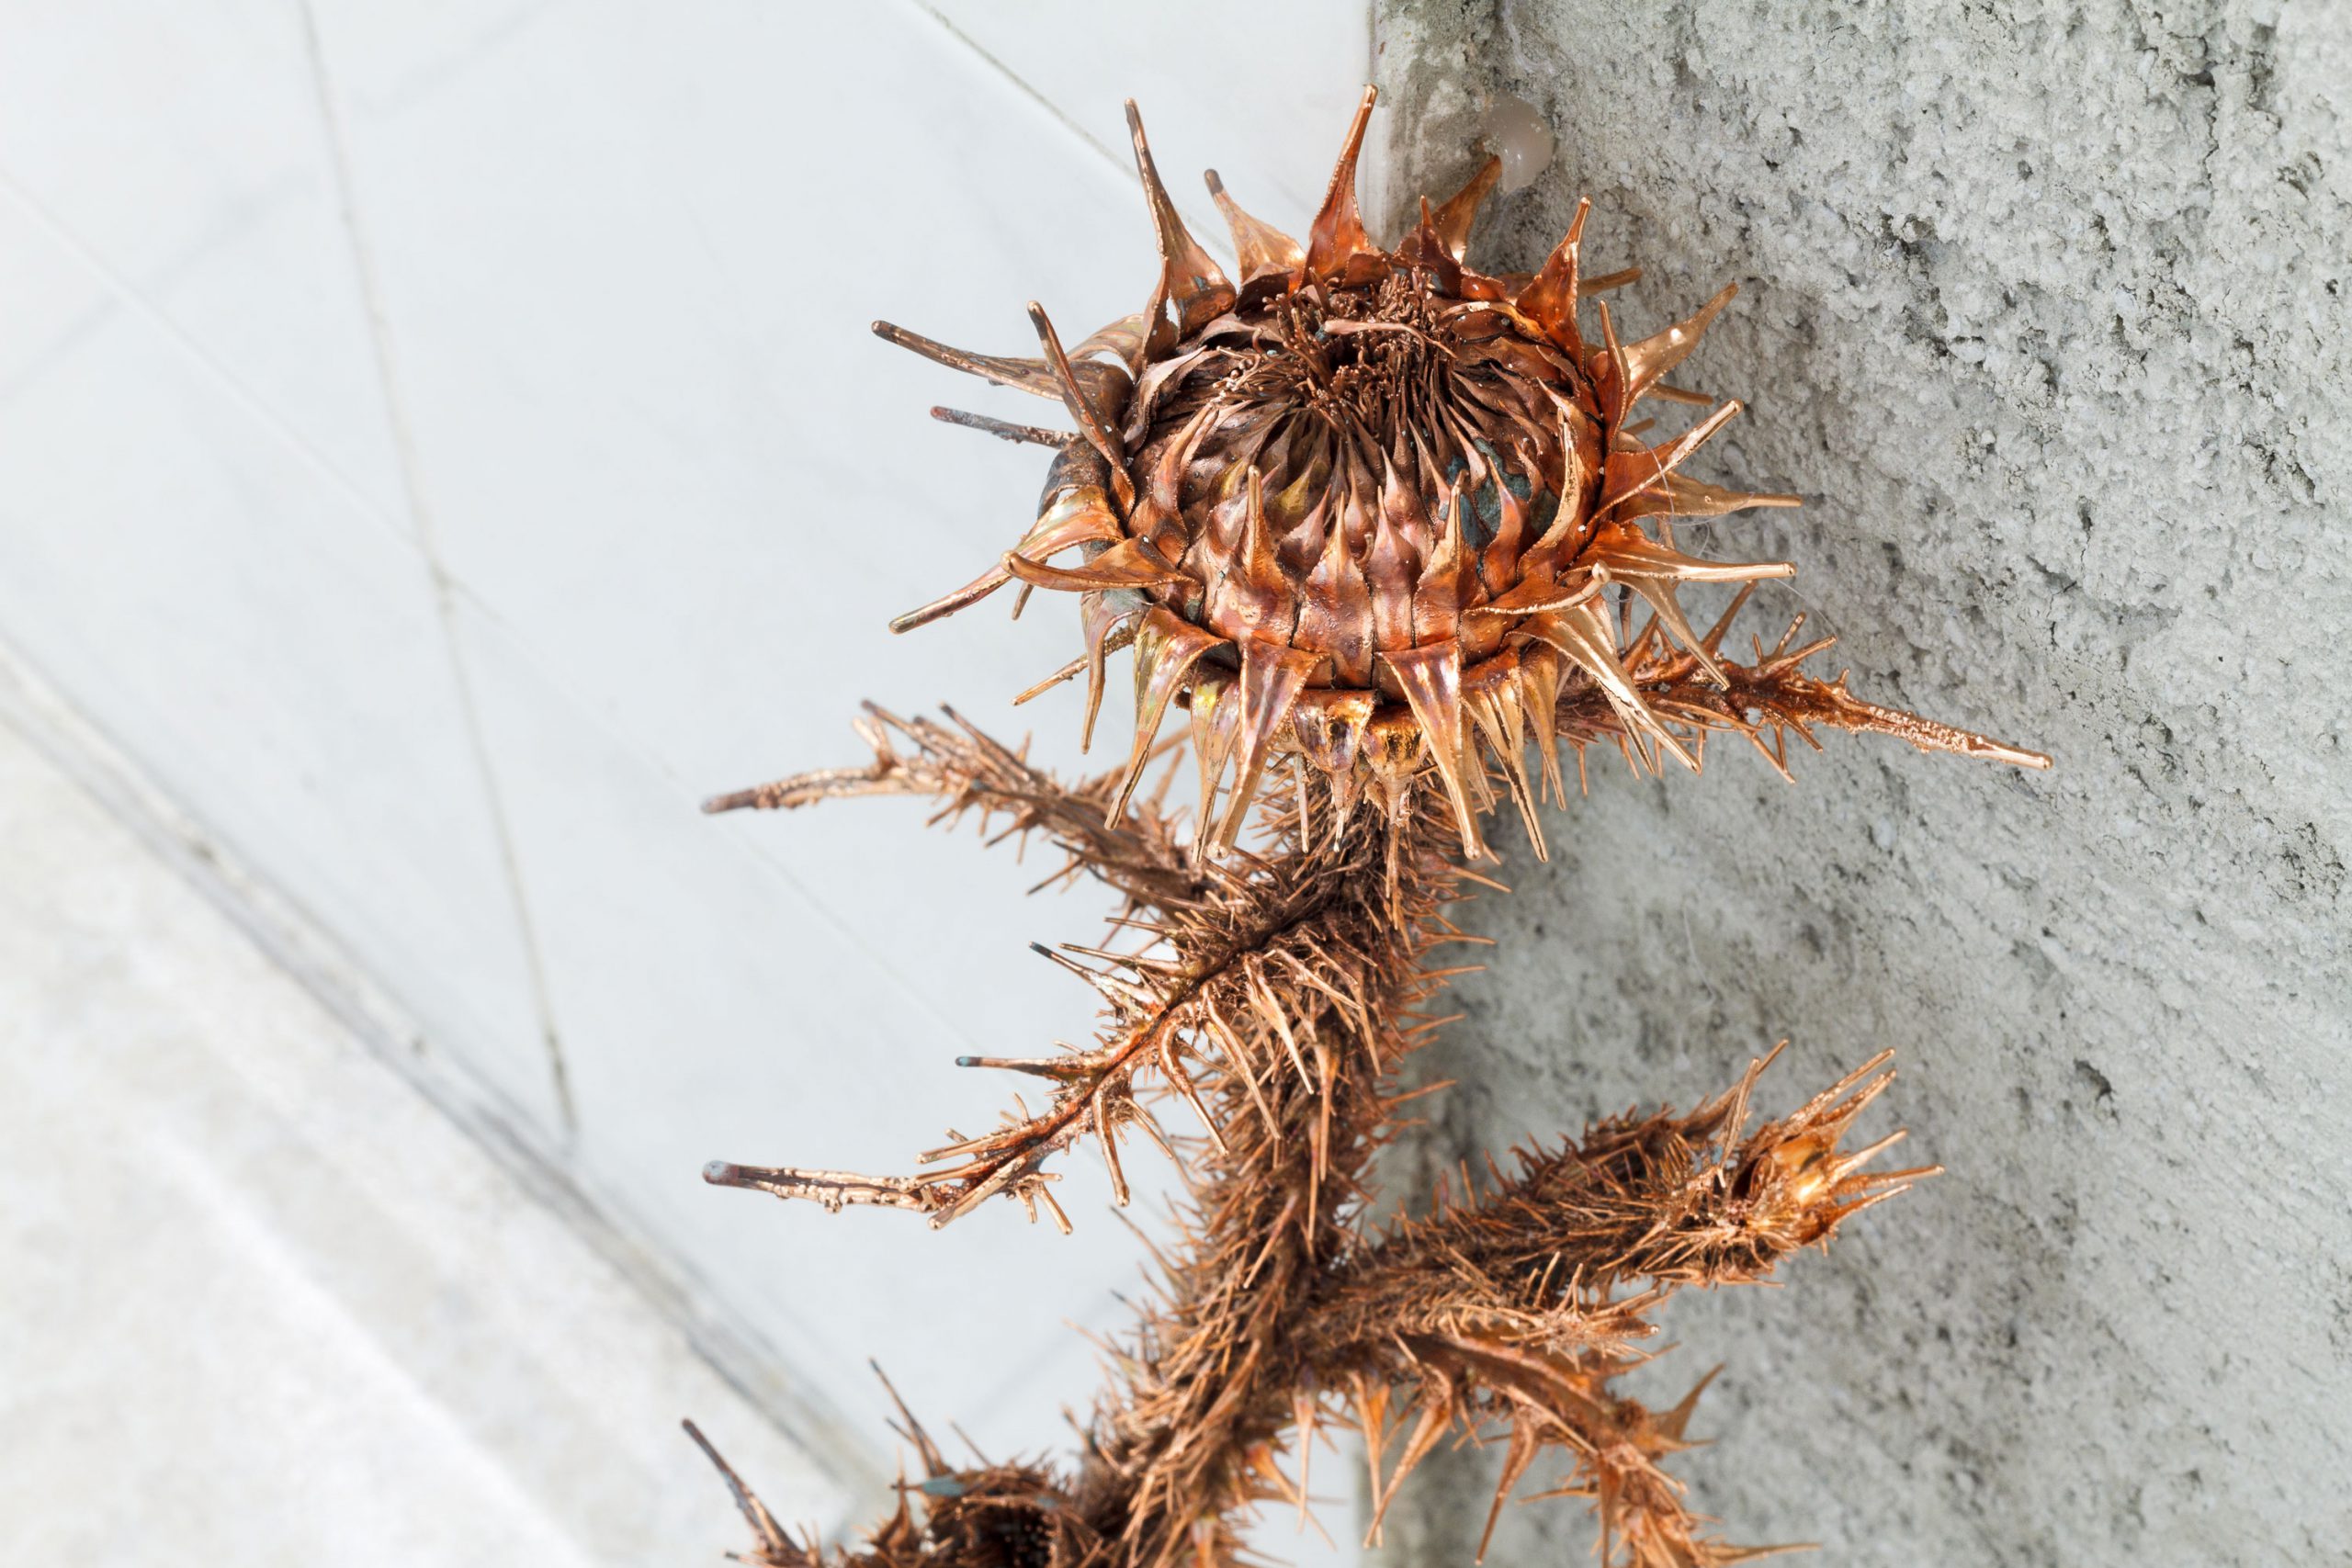 Lito Kattou, Flower II, 2019, electroformed copper, dimensions variable, courtesy the artist and T293, Rome, photo: Elena Radice